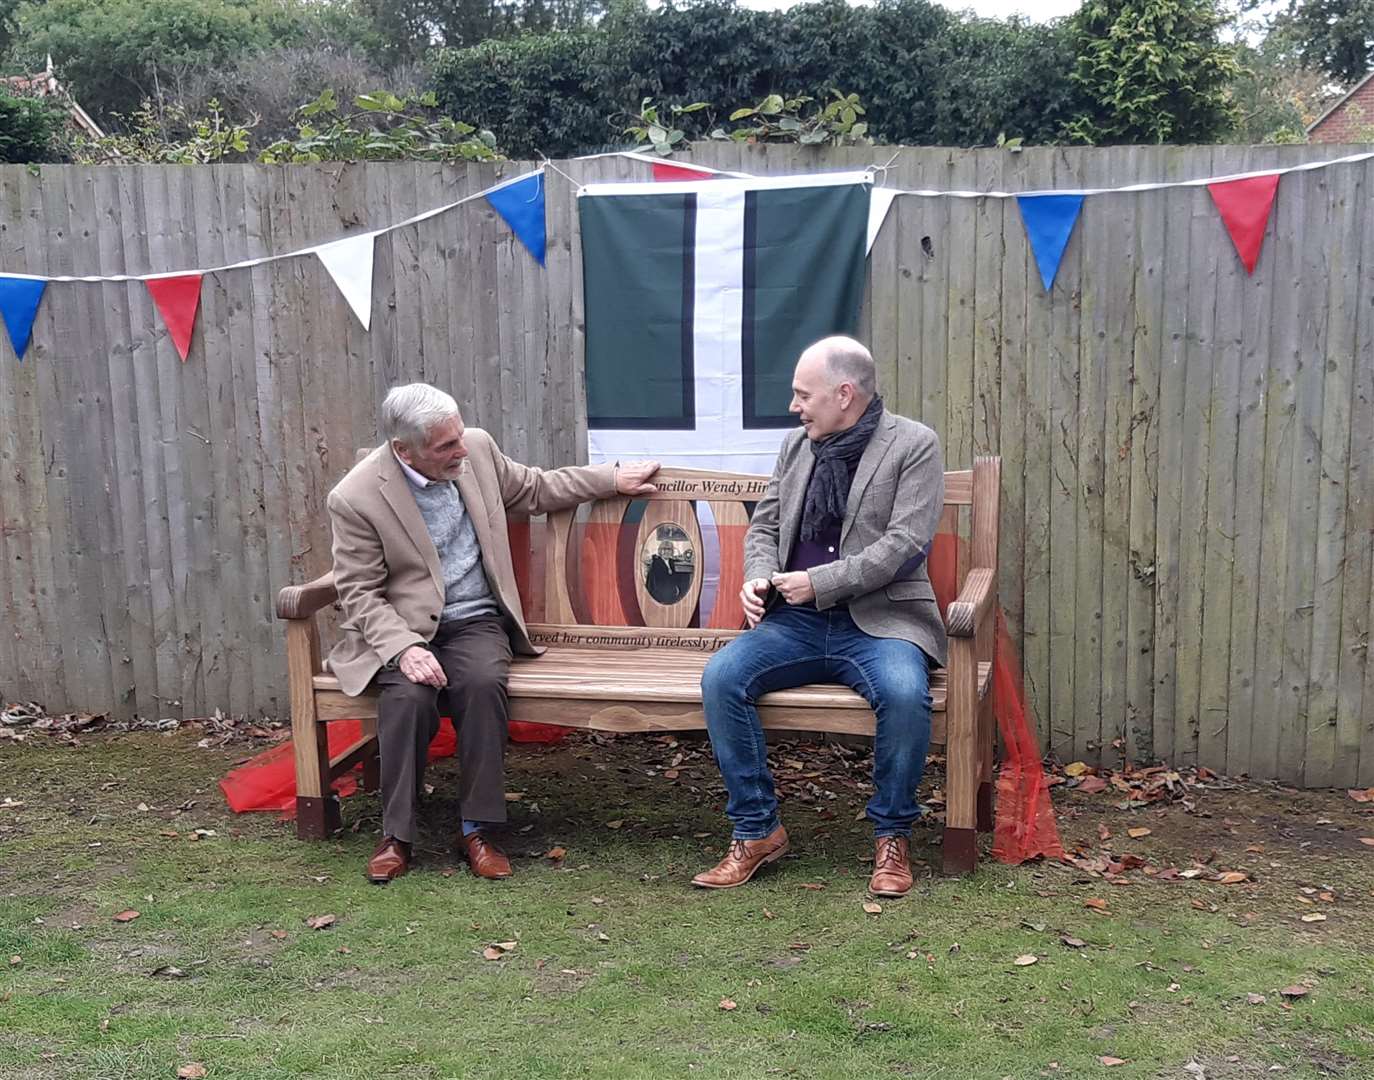 Cllr Bob Hinder tries out the bench with his son Andrew